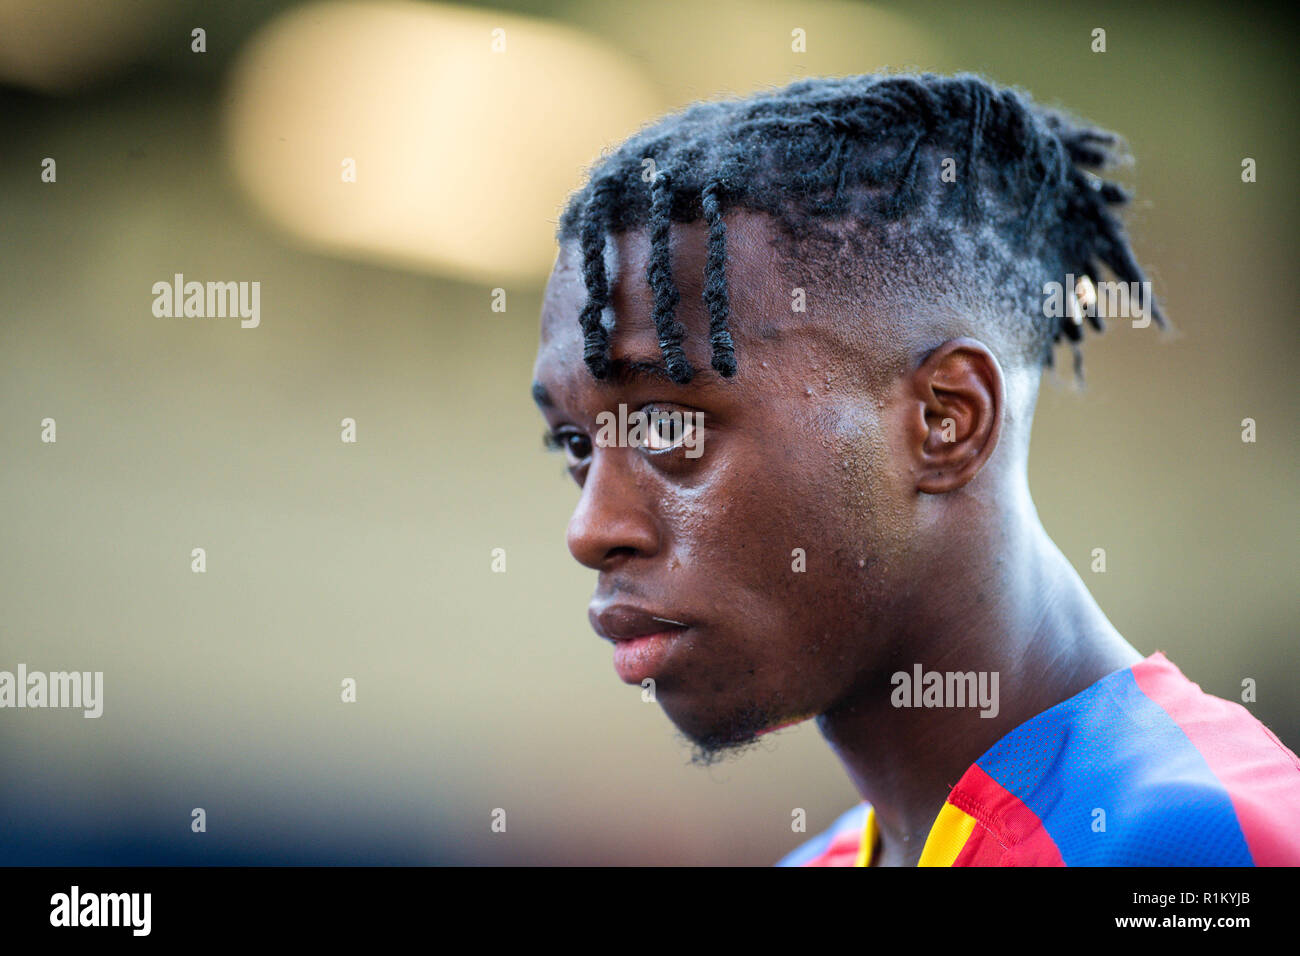 LONDON, ENGLAND - SEPTEMBER 01: Aaron Wan-Bissaka of Crystal Palace during  the Premier League match between